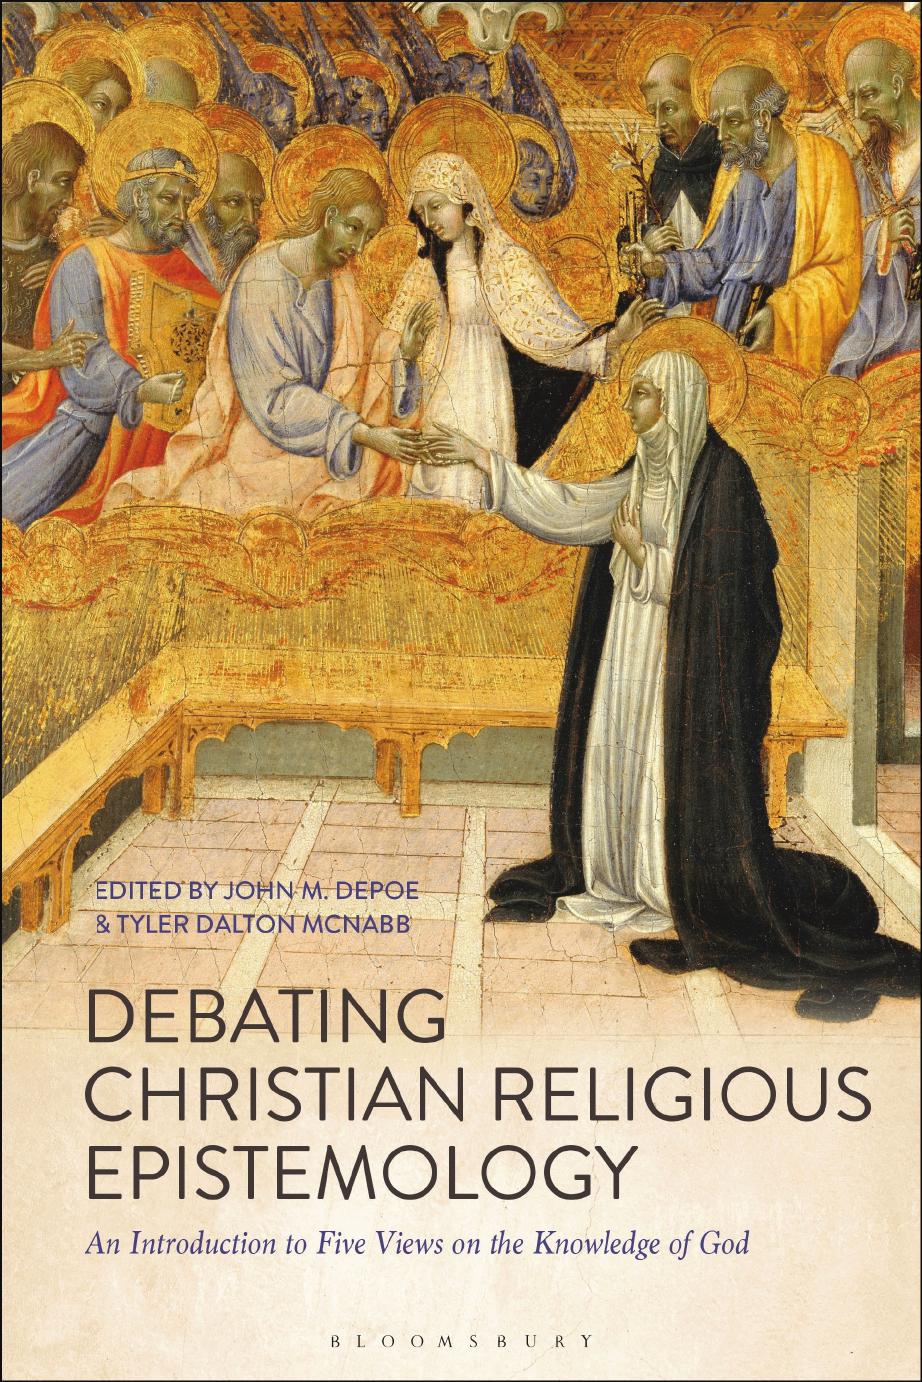 Debating Christian Religious Epistemology: An Introduction to Five Views on the Knowledge of God